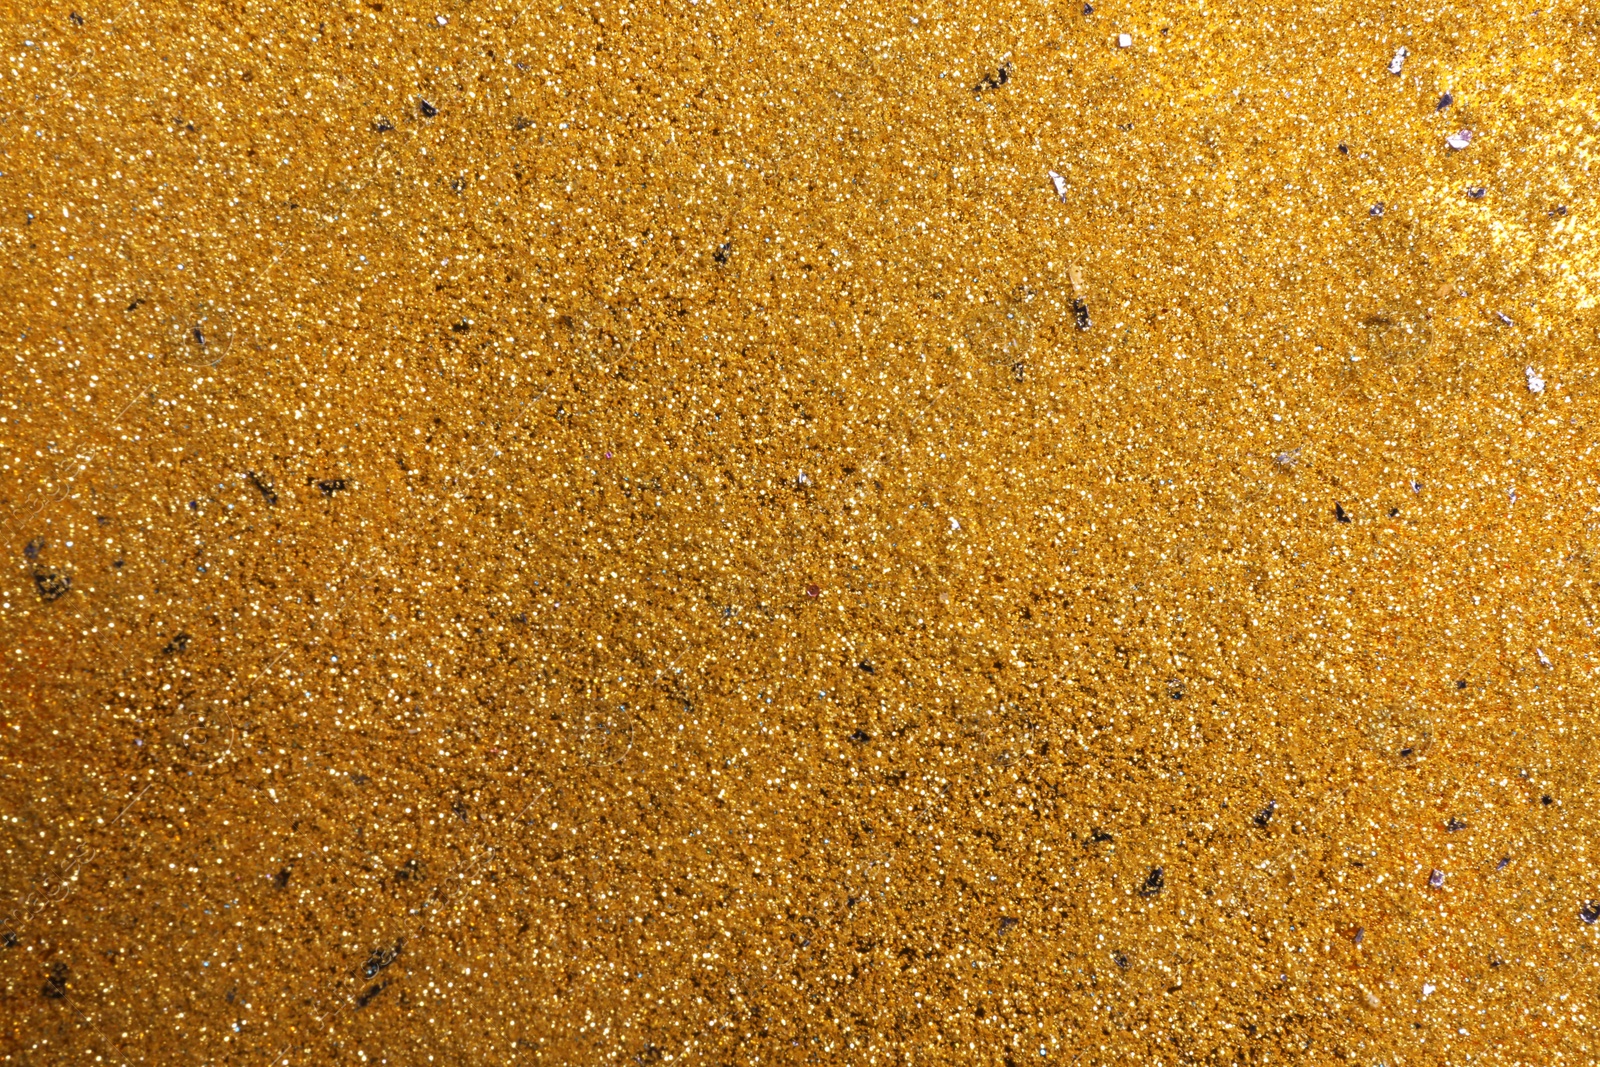 Photo of Shiny golden sand as background, top view